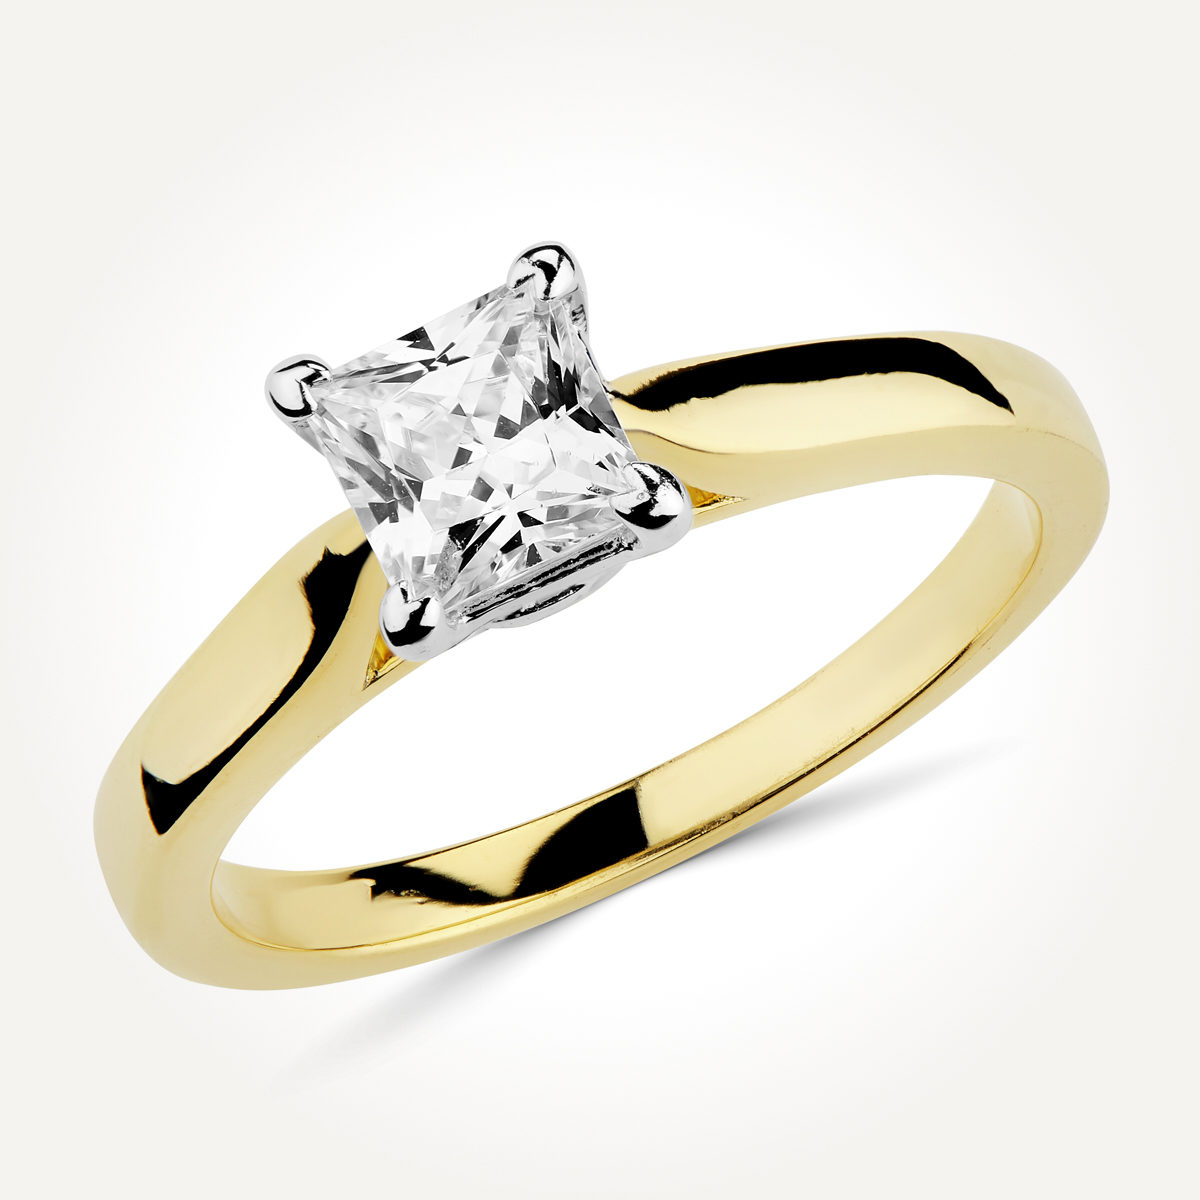 Solitaire Diamond Engagement Ring - Style 7587